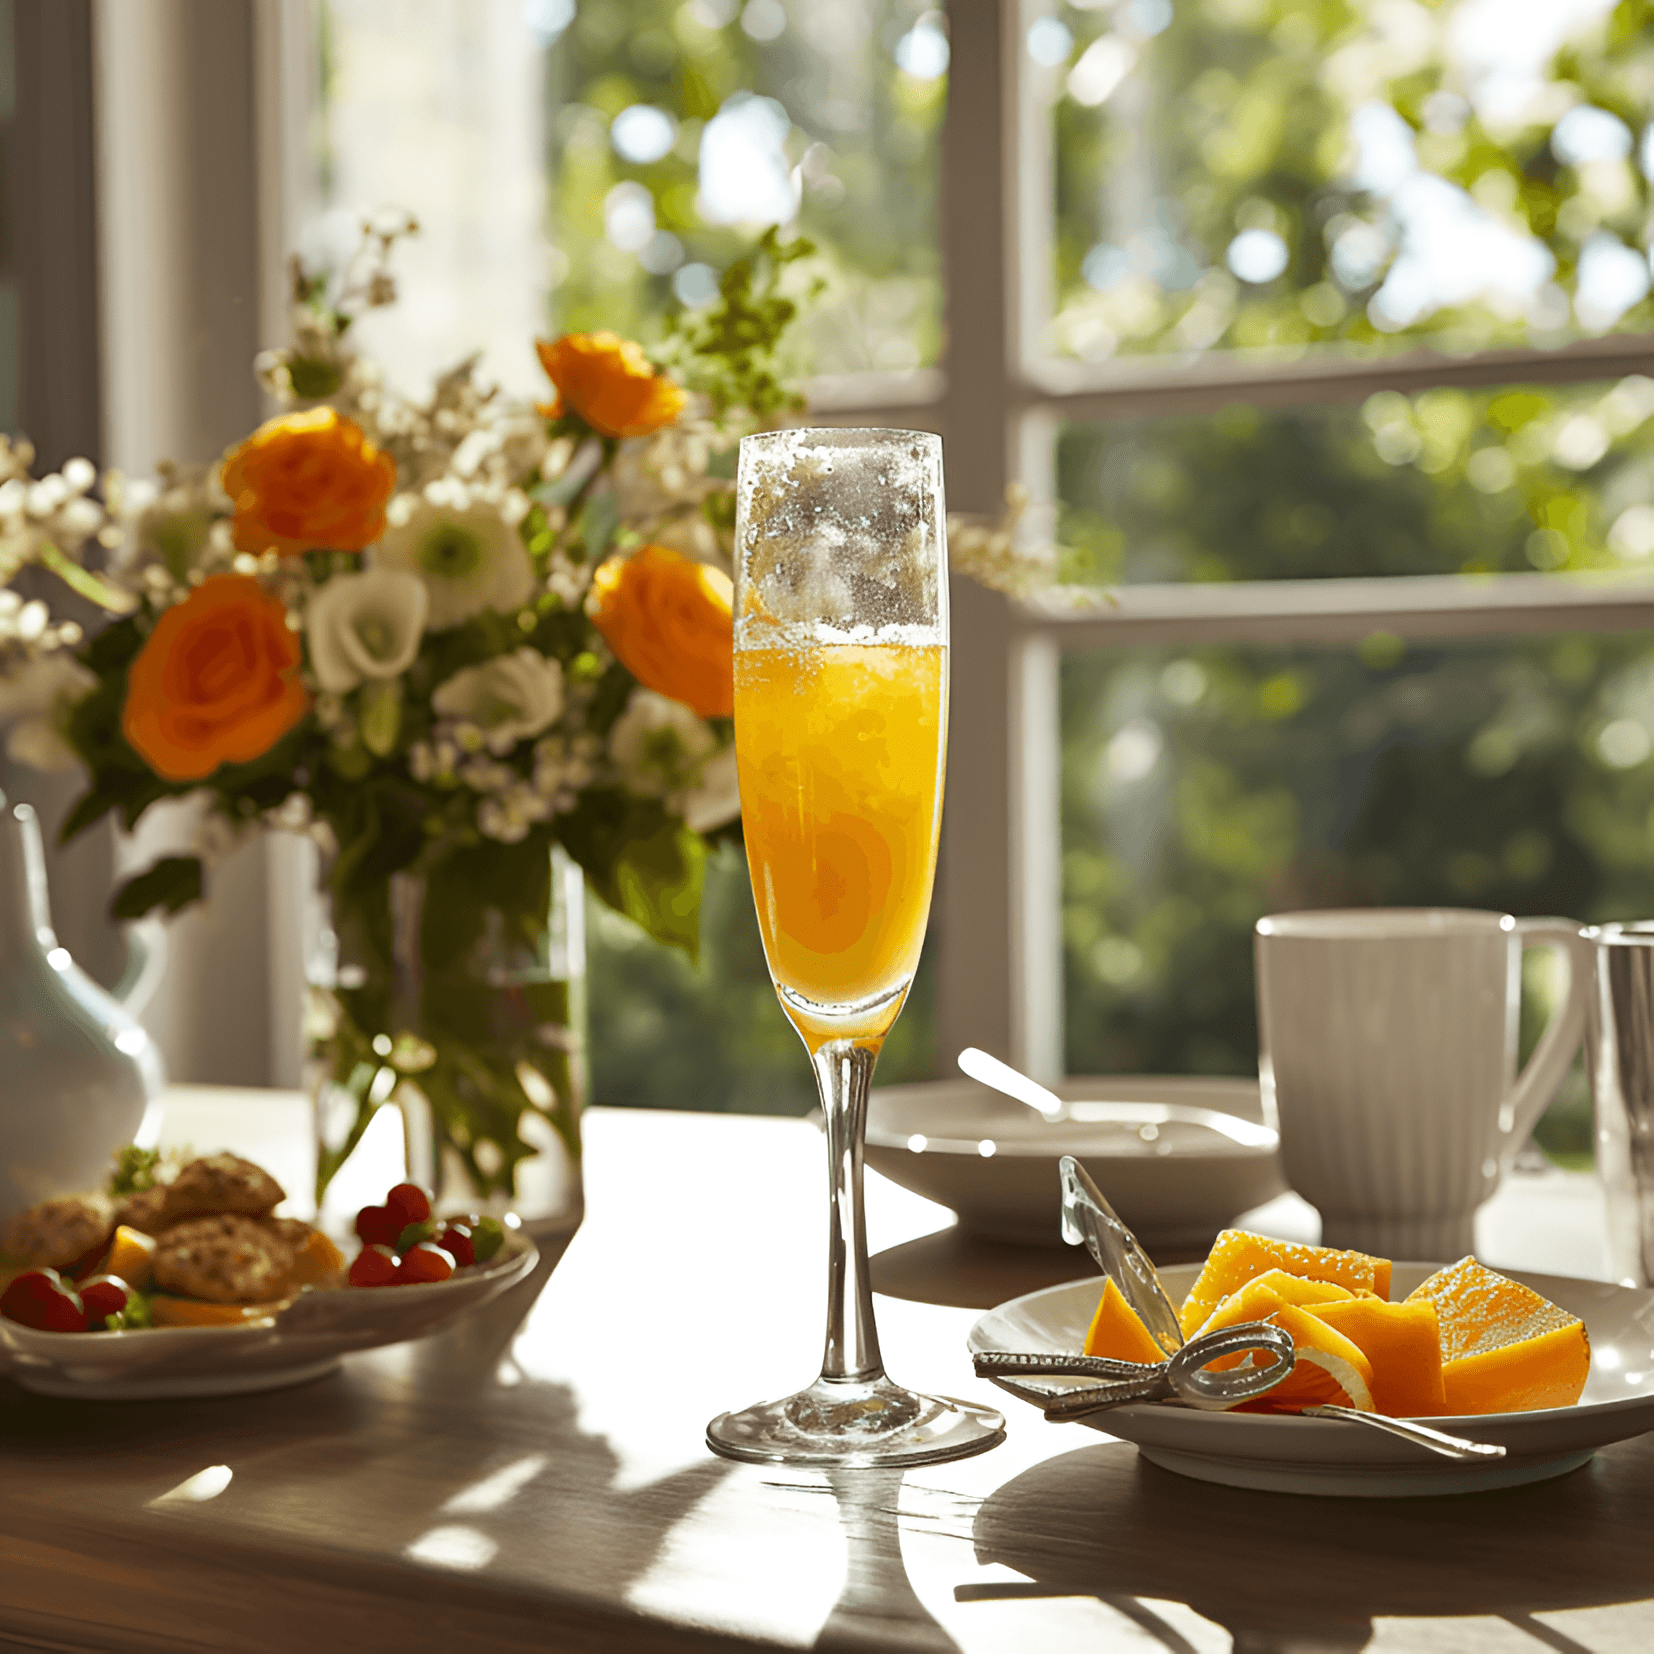 The Mimosa has a refreshing, light, and fruity taste. It is slightly sweet with a hint of tartness from the orange juice, and the sparkling wine adds a bubbly effervescence.